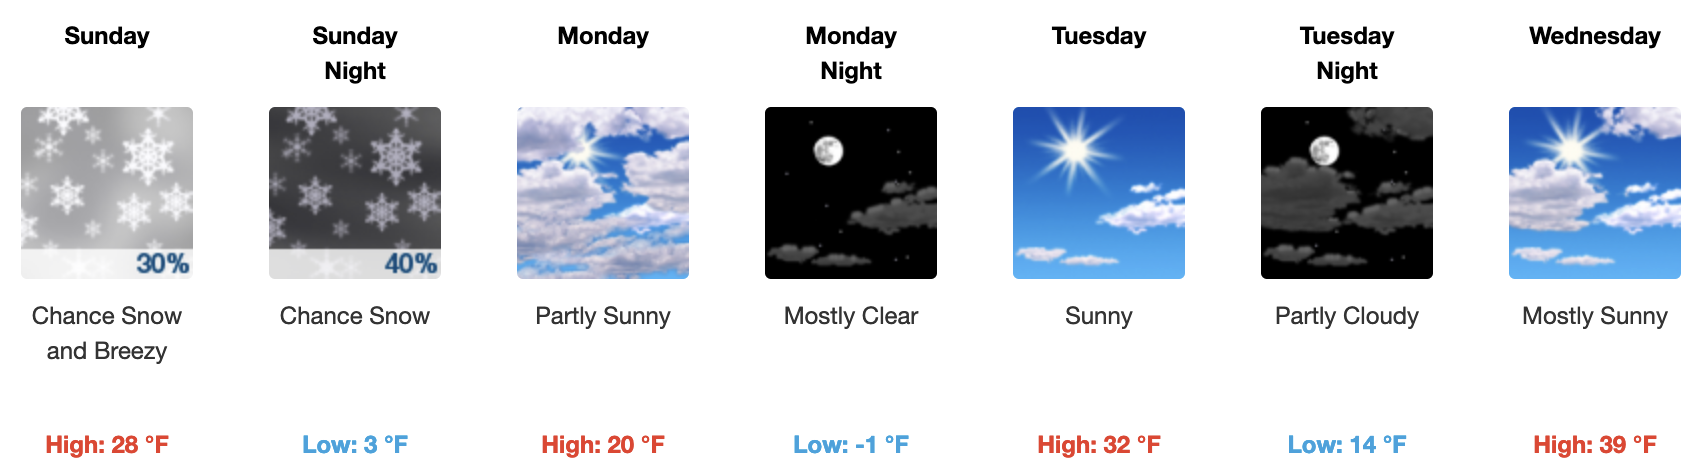 NWS Mammoth Mountain Forecast